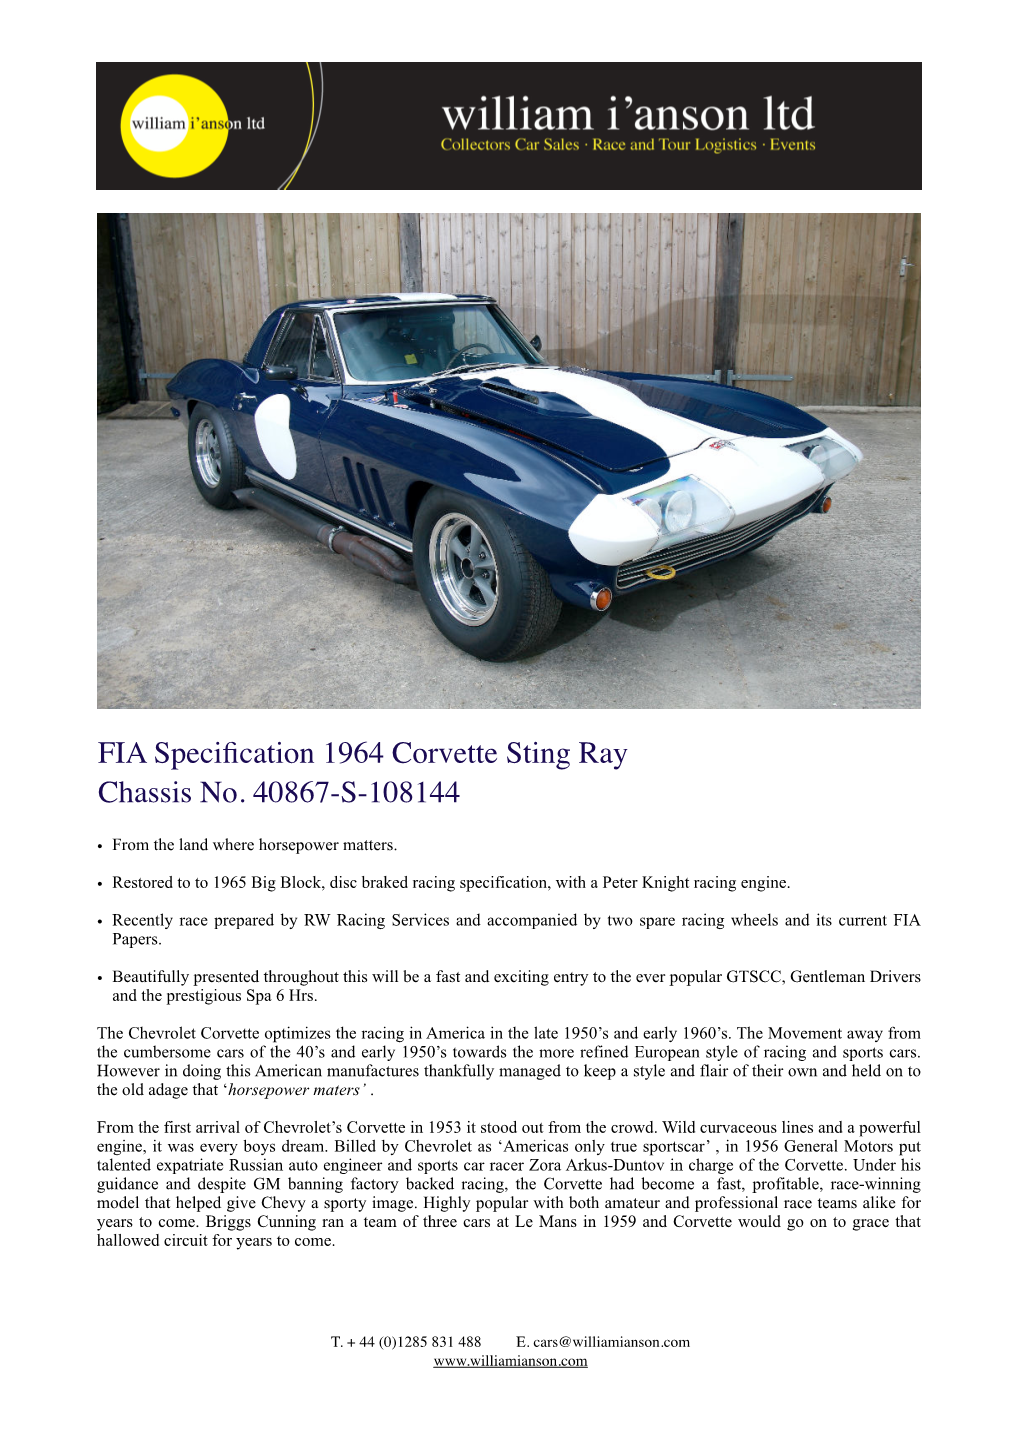 FIA Specification 1964 Corvette Sting Ray Chassis No. 40867-S-108144